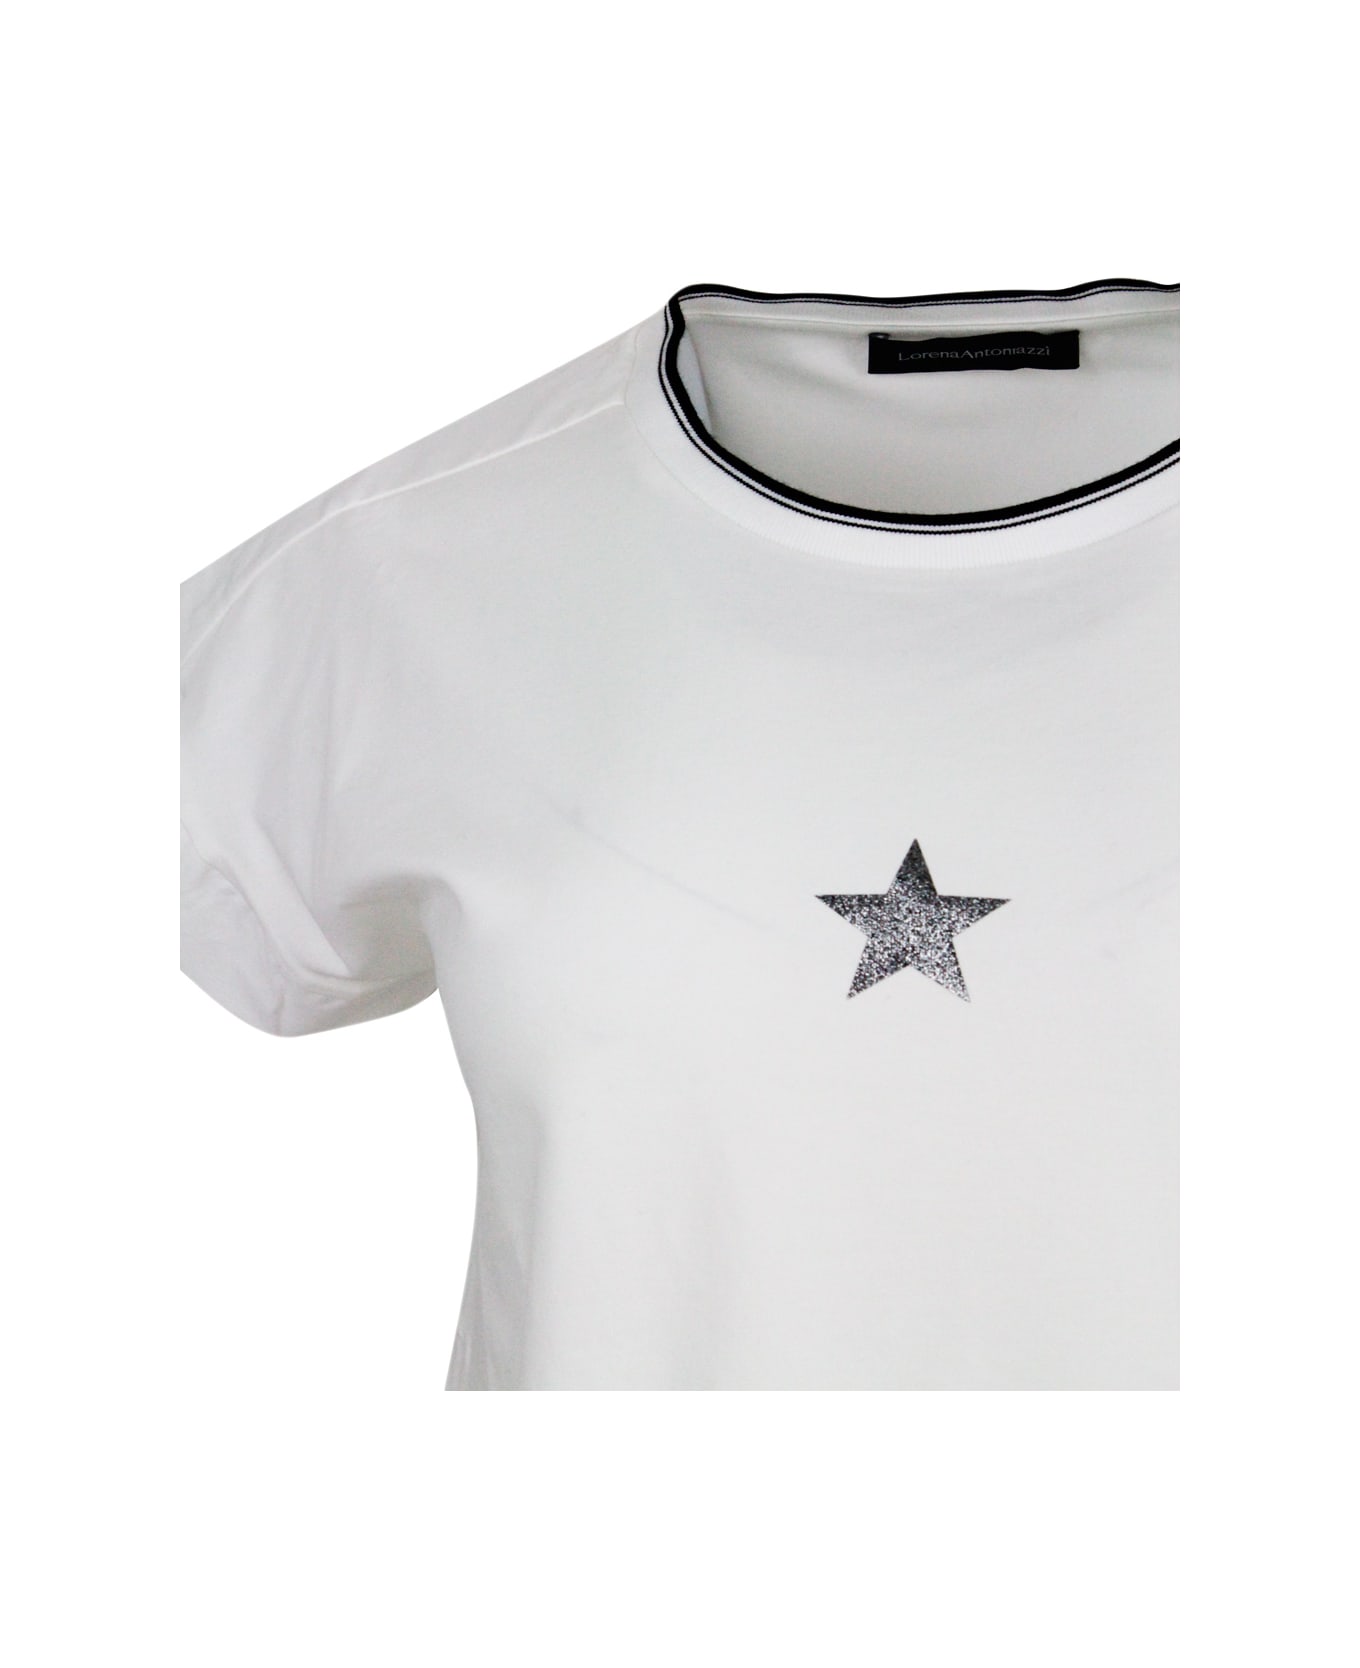 Lorena Antoniazzi Short-sleeved Crew-neck T-shirt In Stretch Cotton With Lurex Star On The Front - cream